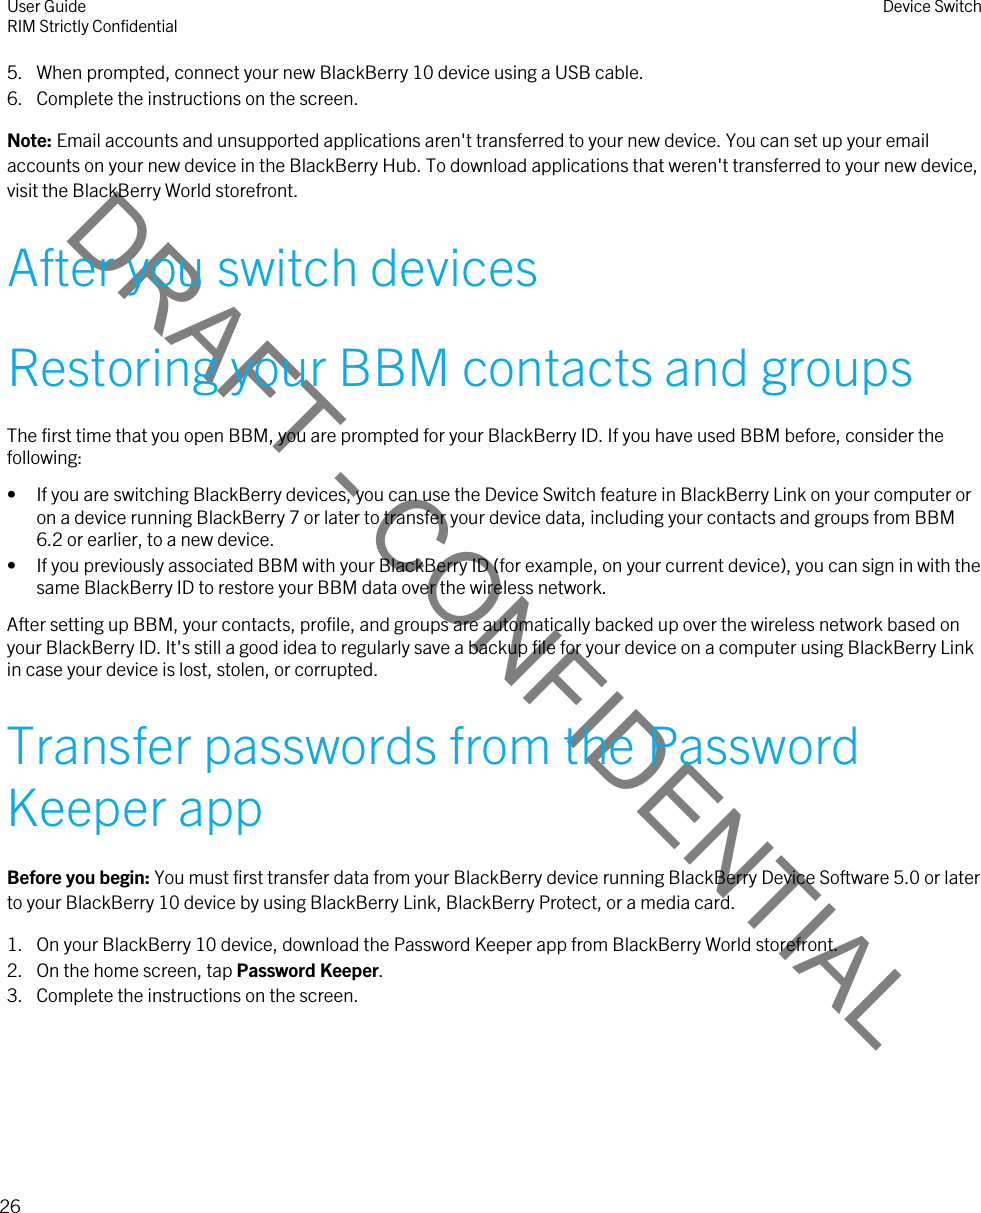 DRAFT - CONFIDENTIAL5. When prompted, connect your new BlackBerry 10 device using a USB cable.6. Complete the instructions on the screen.Note: Email accounts and unsupported applications aren&apos;t transferred to your new device. You can set up your email accounts on your new device in the BlackBerry Hub. To download applications that weren&apos;t transferred to your new device, visit the BlackBerry World storefront.After you switch devicesRestoring your BBM contacts and groupsThe first time that you open BBM, you are prompted for your BlackBerry ID. If you have used BBM before, consider the following:• If you are switching BlackBerry devices, you can use the Device Switch feature in BlackBerry Link on your computer or on a device running BlackBerry 7 or later to transfer your device data, including your contacts and groups from BBM 6.2 or earlier, to a new device.• If you previously associated BBM with your BlackBerry ID (for example, on your current device), you can sign in with the same BlackBerry ID to restore your BBM data over the wireless network.After setting up BBM, your contacts, profile, and groups are automatically backed up over the wireless network based on your BlackBerry ID. It&apos;s still a good idea to regularly save a backup file for your device on a computer using BlackBerry Link in case your device is lost, stolen, or corrupted.Transfer passwords from the Password Keeper appBefore you begin: You must first transfer data from your BlackBerry device running BlackBerry Device Software 5.0 or later to your BlackBerry 10 device by using BlackBerry Link, BlackBerry Protect, or a media card.1. On your BlackBerry 10 device, download the Password Keeper app from BlackBerry World storefront.2. On the home screen, tap Password Keeper.3. Complete the instructions on the screen.User GuideRIM Strictly Confidential Device Switch26 